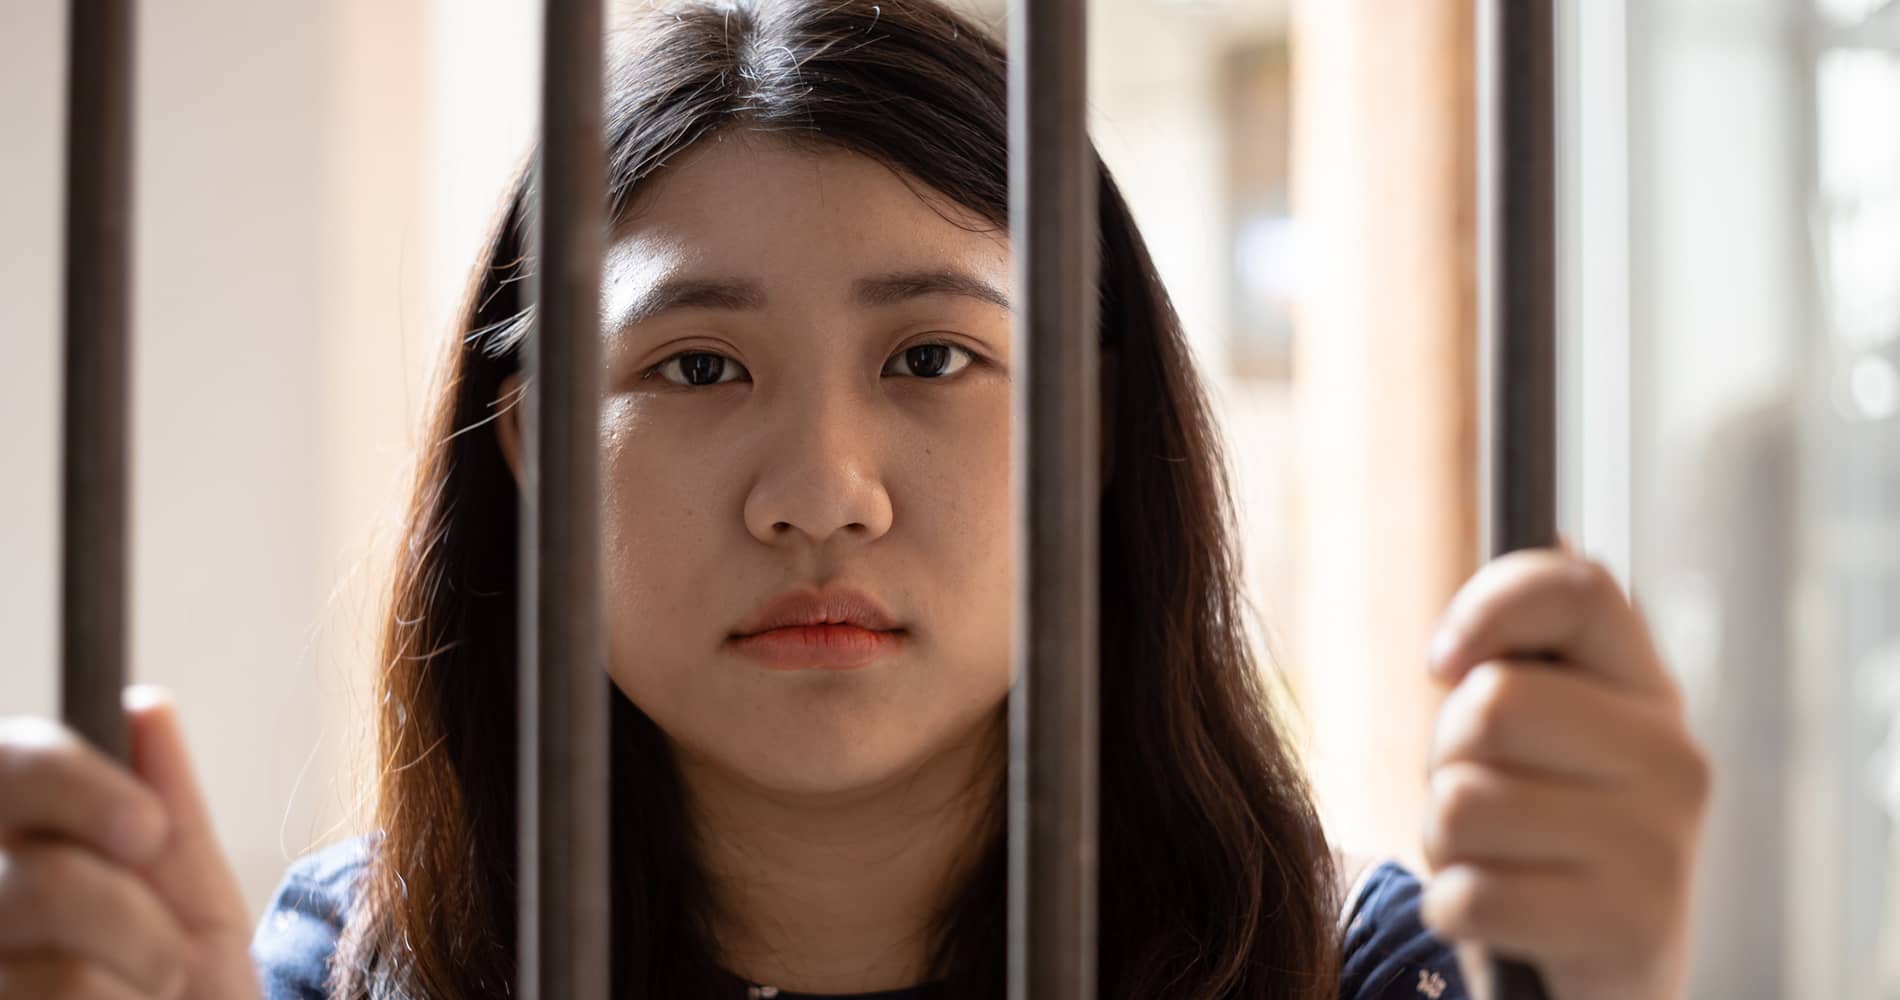 young girl standing behind bars